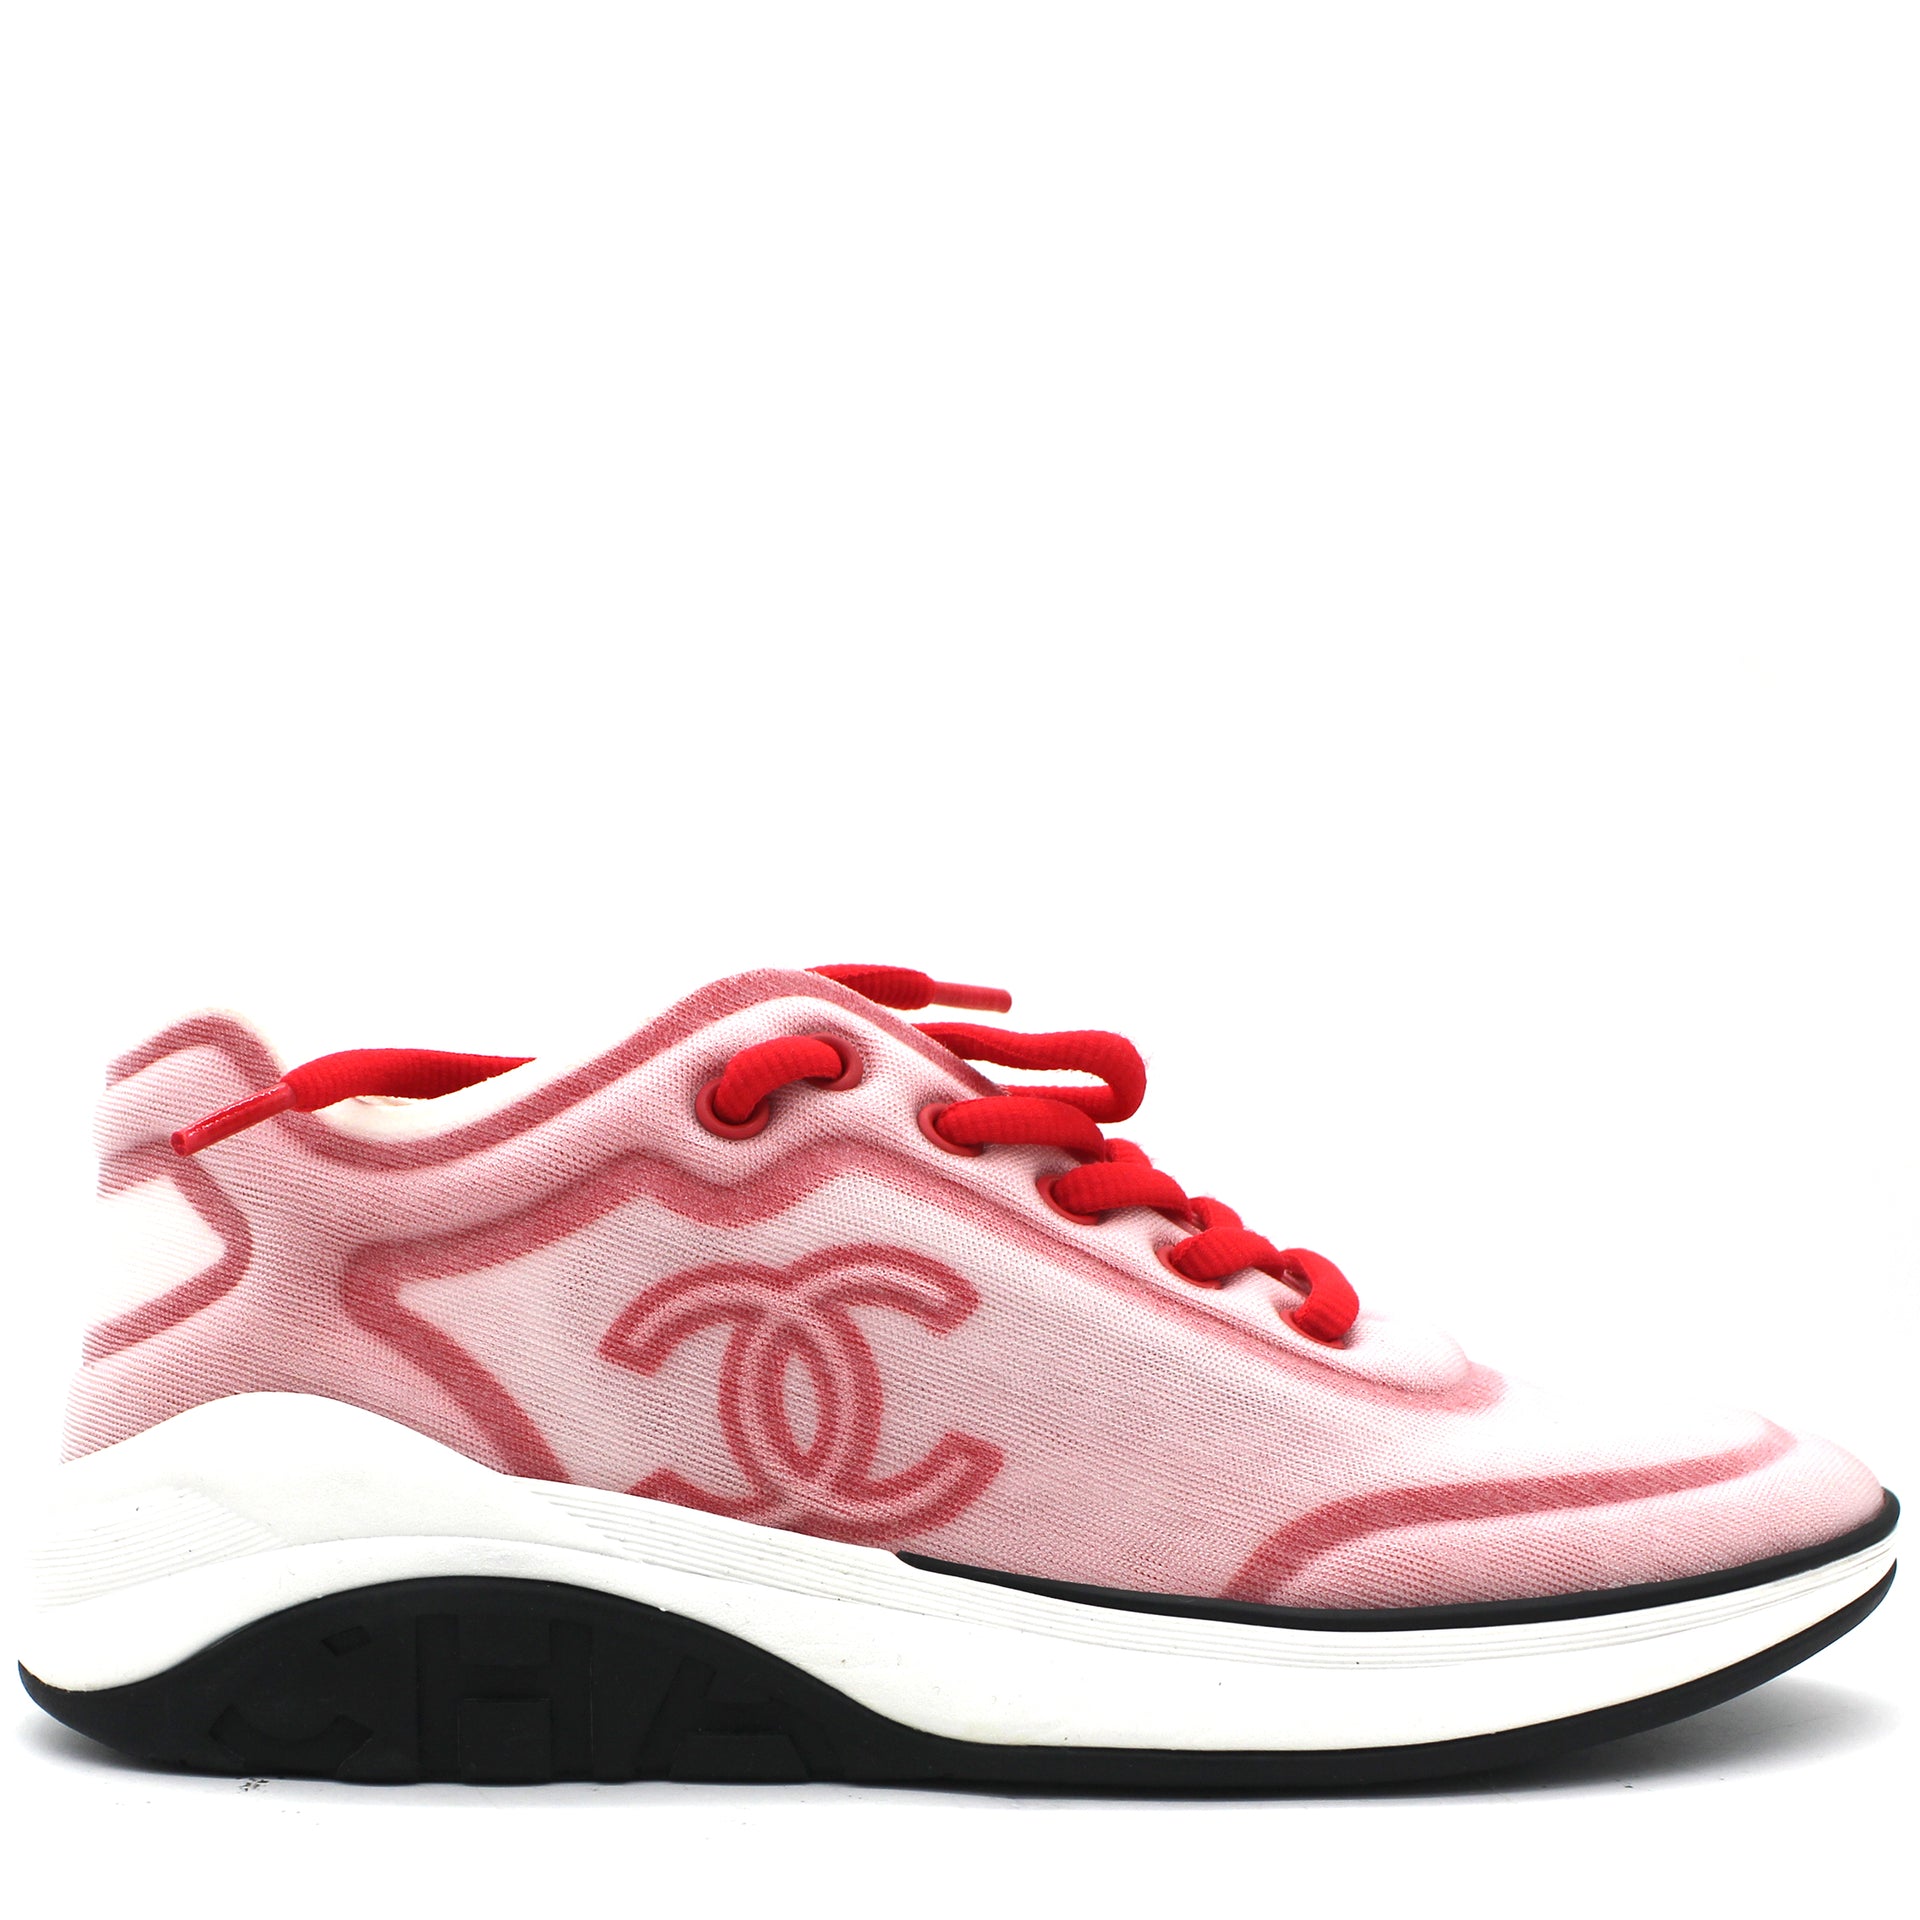 Chanel White/Red Neoprene Leather CC Logo Lace Up Sneaker 37